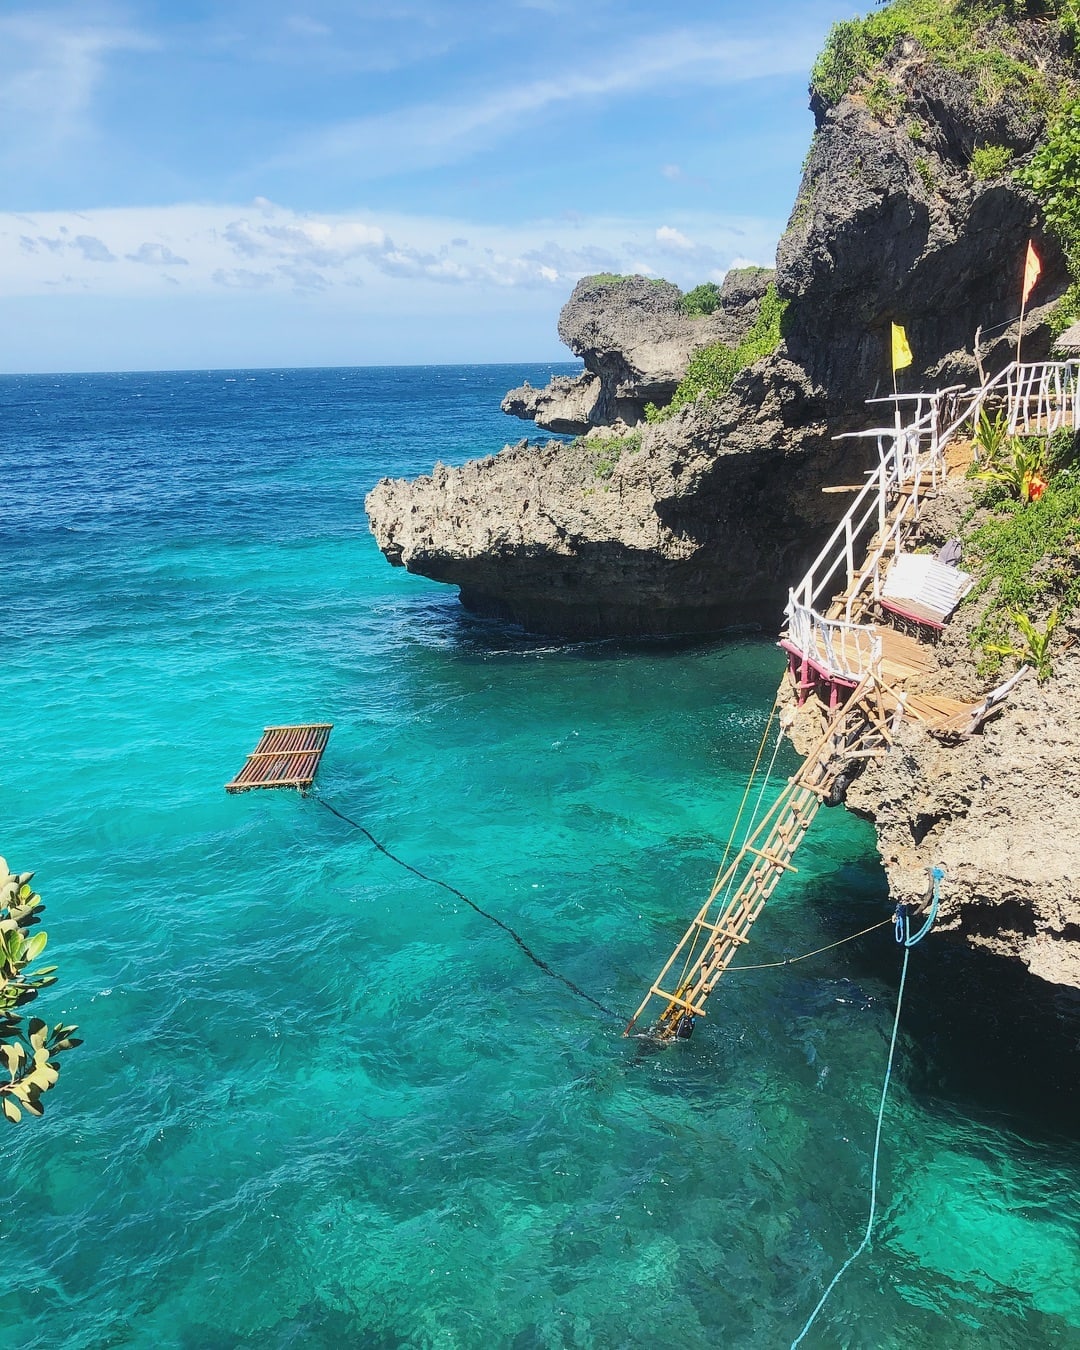  How to get to Carabao Island, Carabao Island travel guide, what to do in Carabao Island, Carabao Island, Cathedral cliff jumping